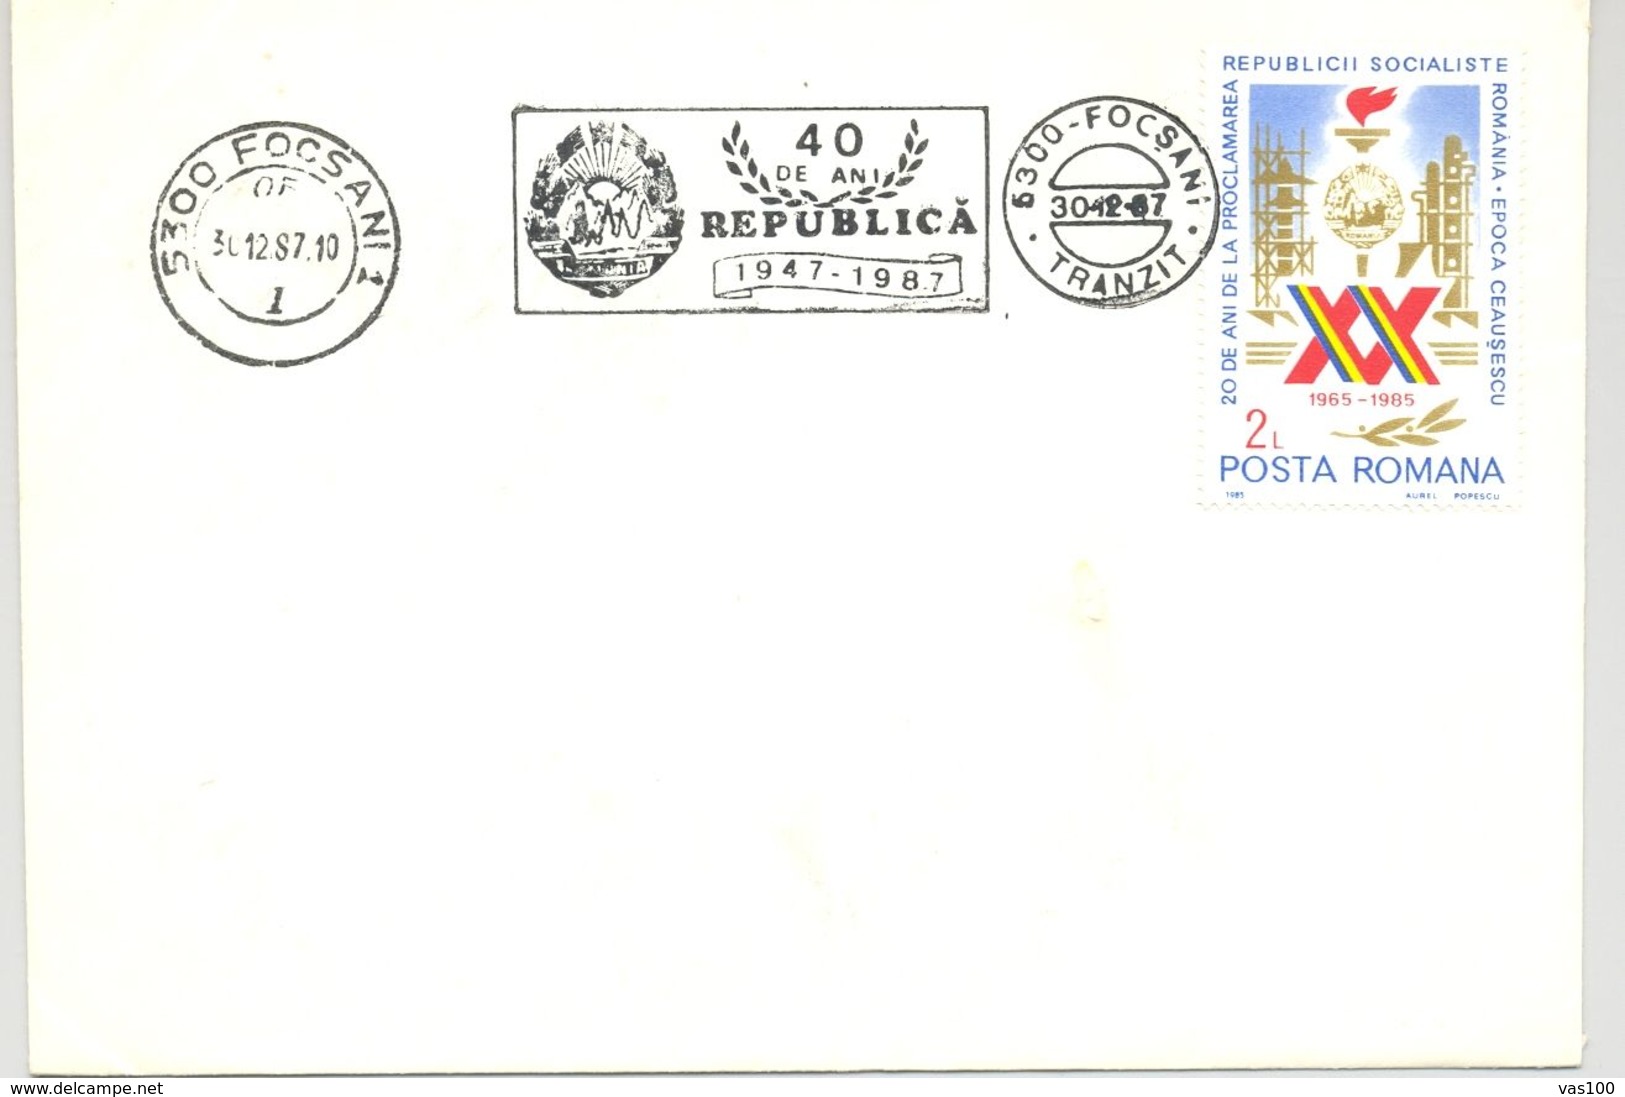 SOCIALIST REPUBLIC NATIONAL DAY, AUGUST 23, SPECIAL POSTMARK AND STAMP ON COVER, 1987, ROMANIA - Cartas & Documentos